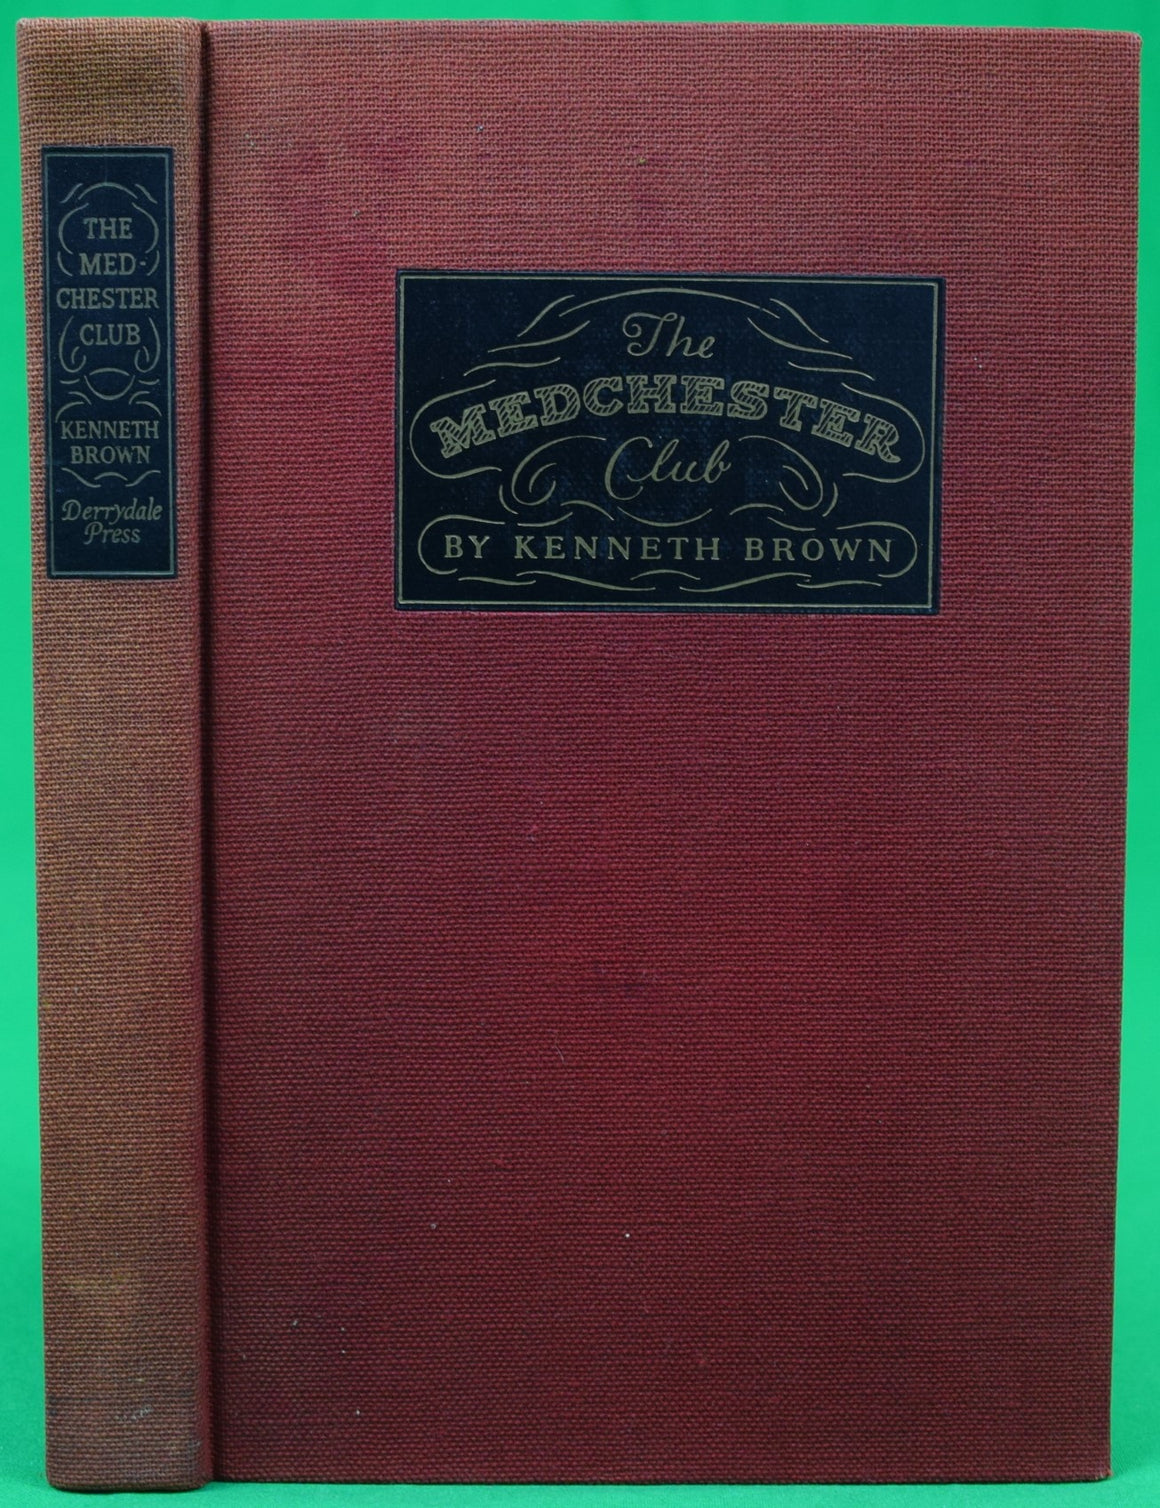 "The Medchester Club" 1938 BROWN, Kenneth (INSCRIBED)